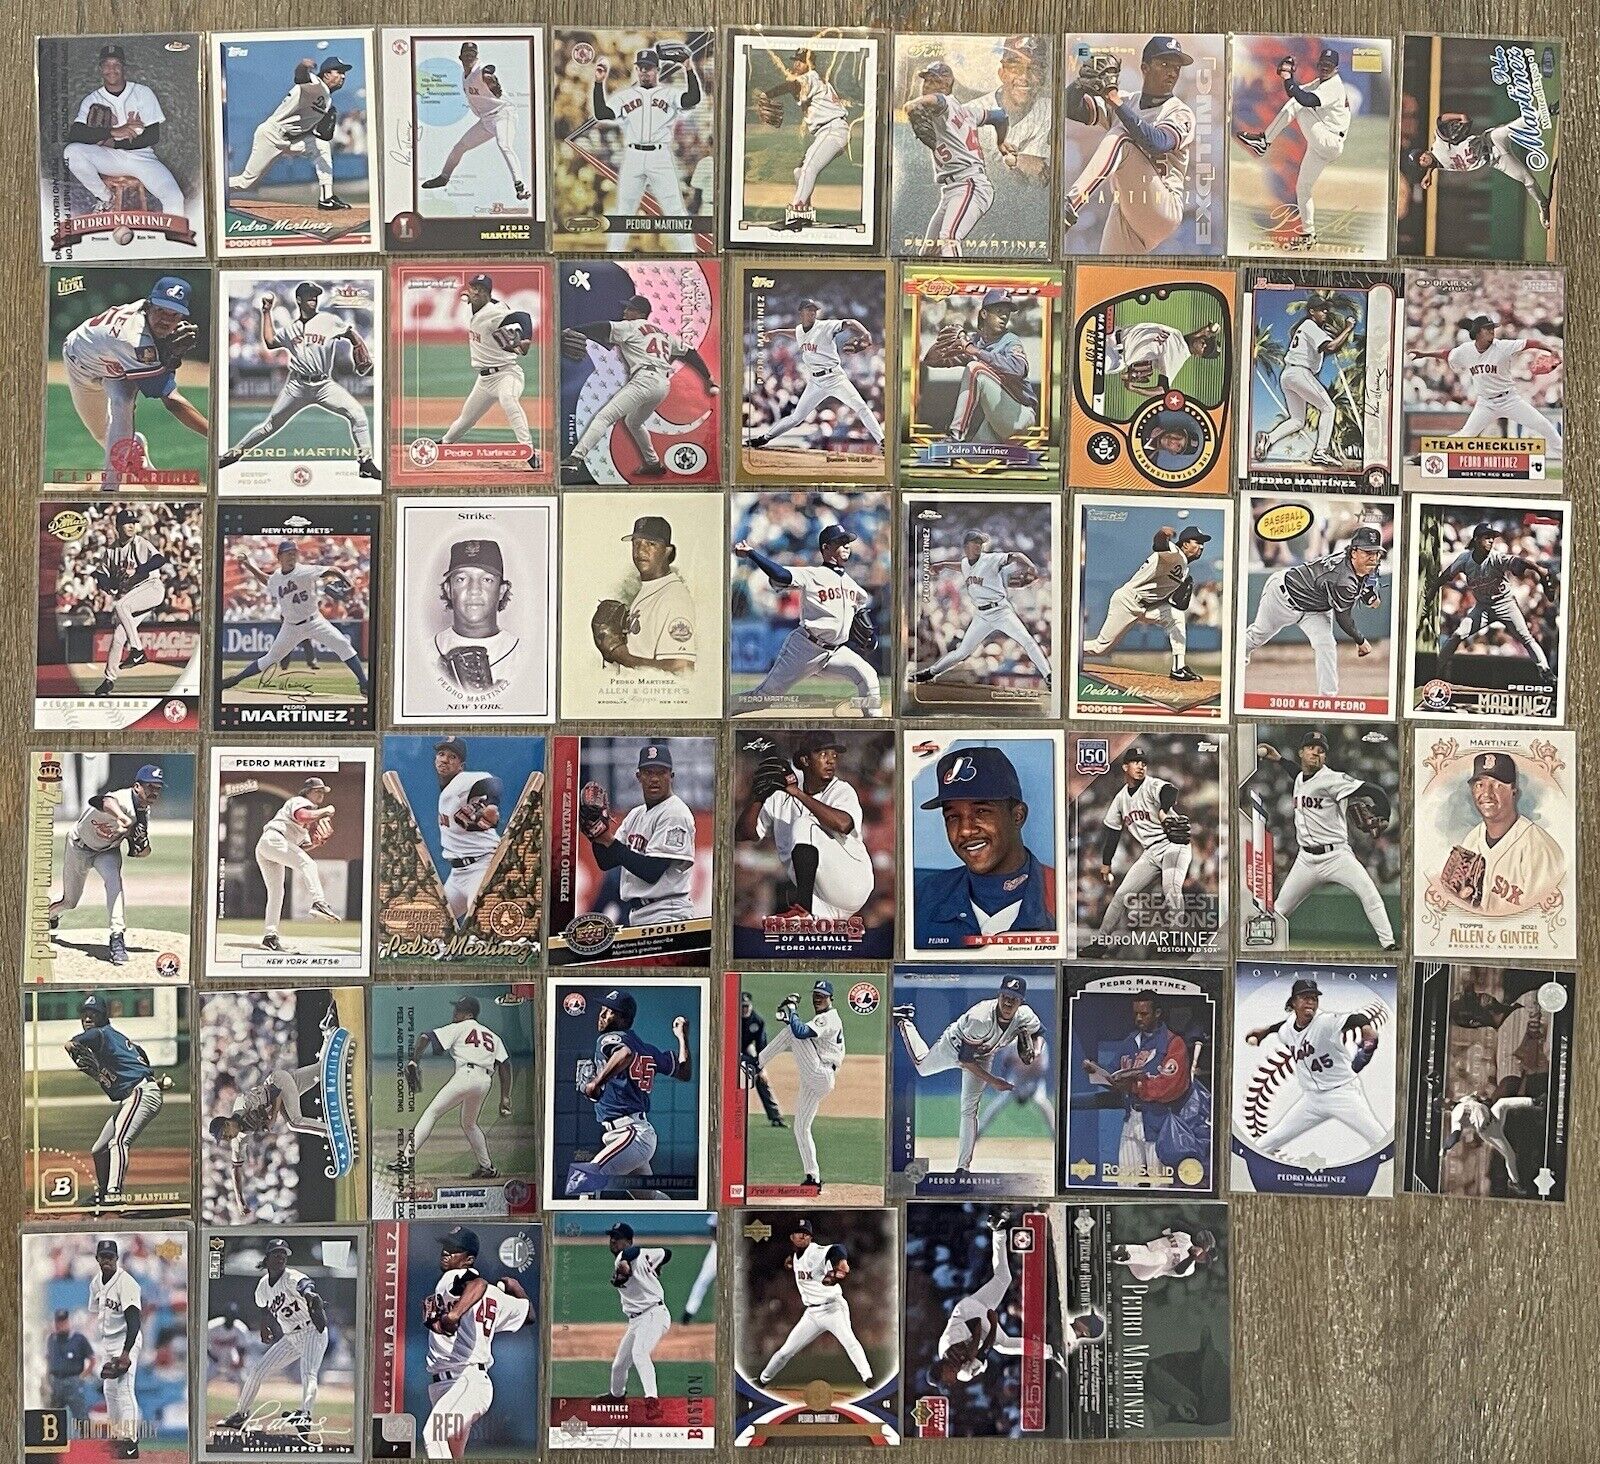 [Lot of 52] Pedro Martinez HOF - Red Sox Mets Expos - Baseball Card Collection